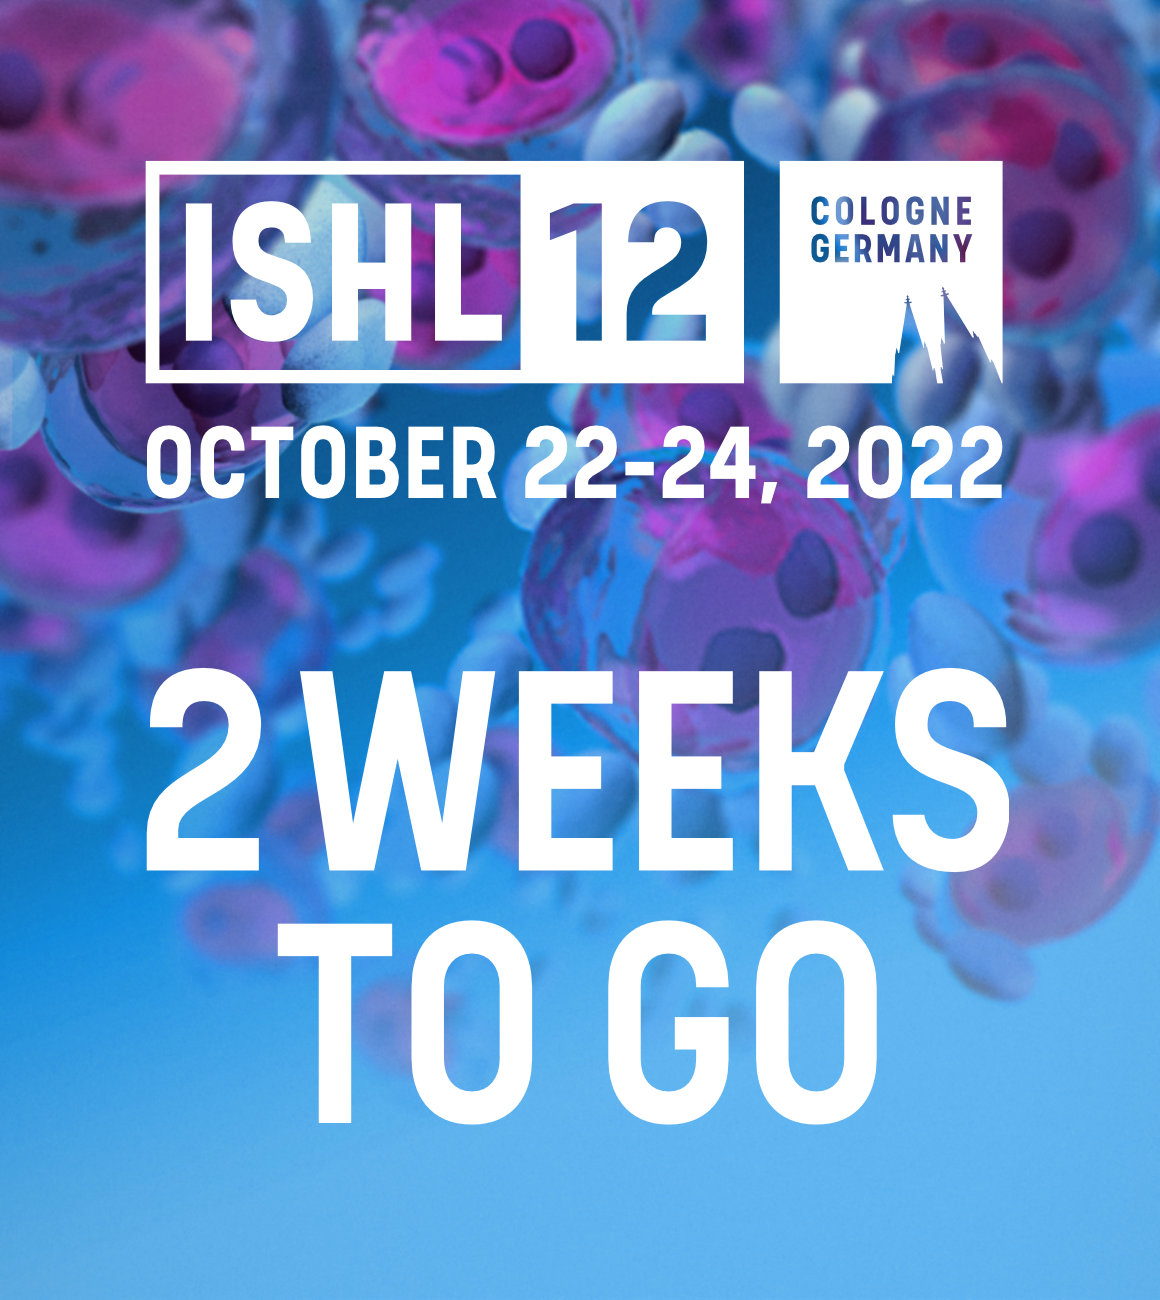 ISHL12 – Only two weeks to go